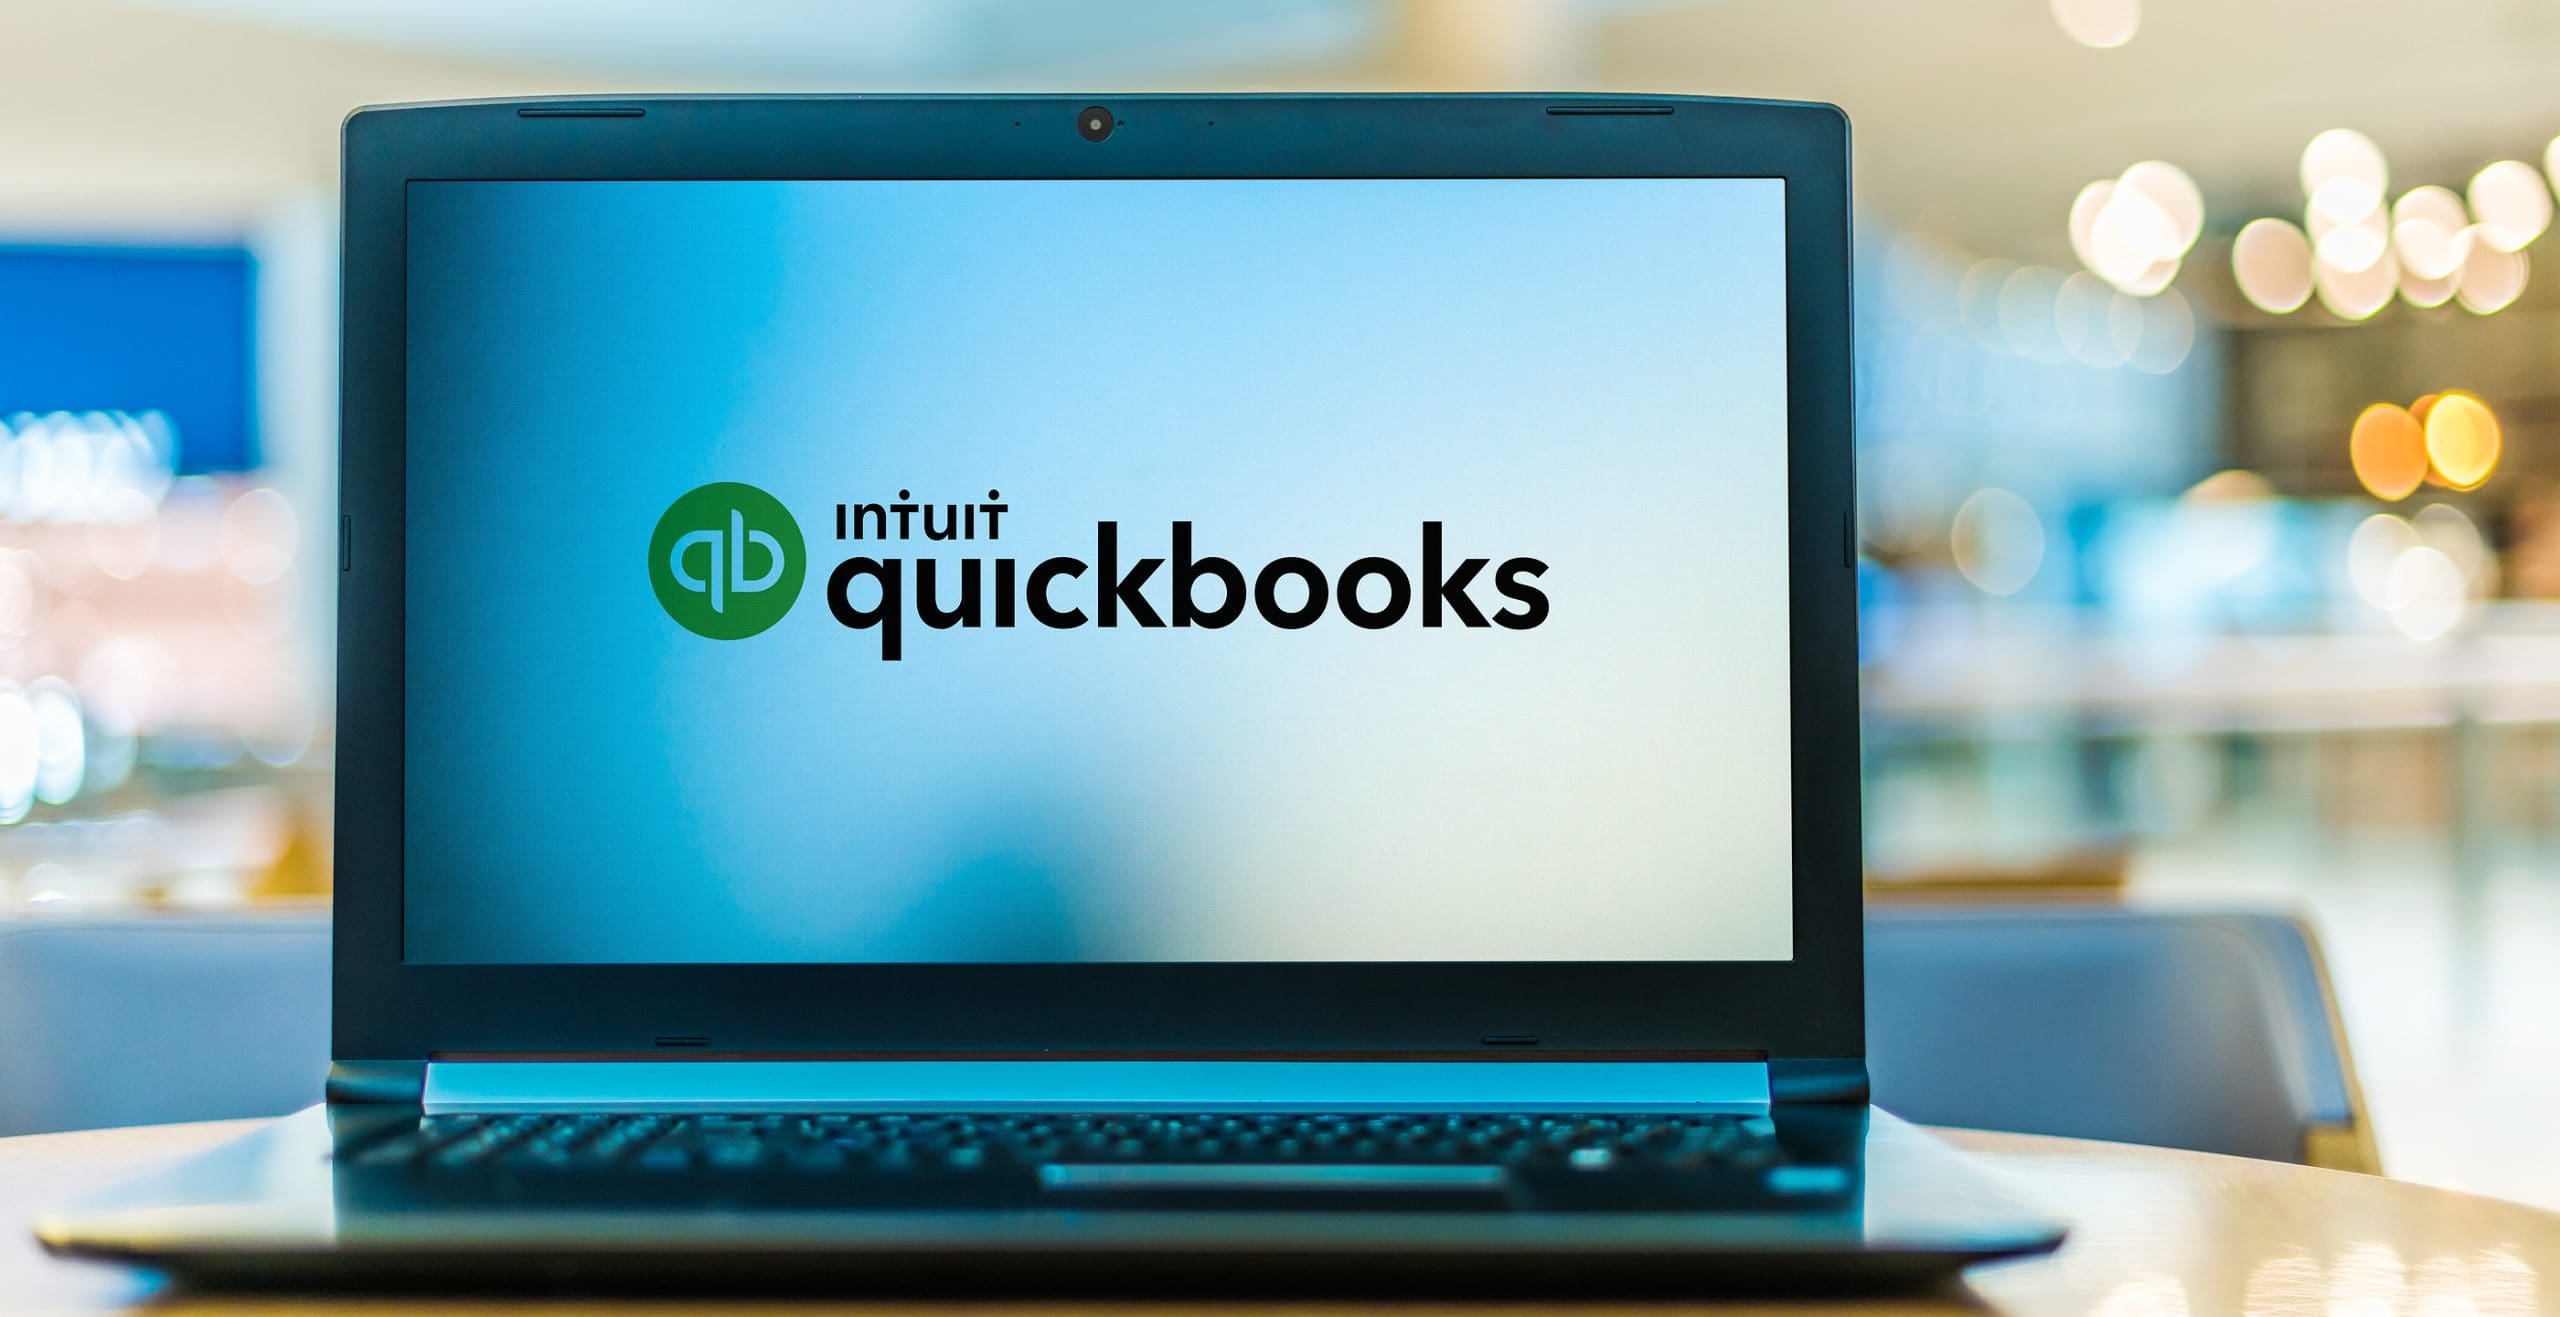 Image of Quickbooks on a laptop.